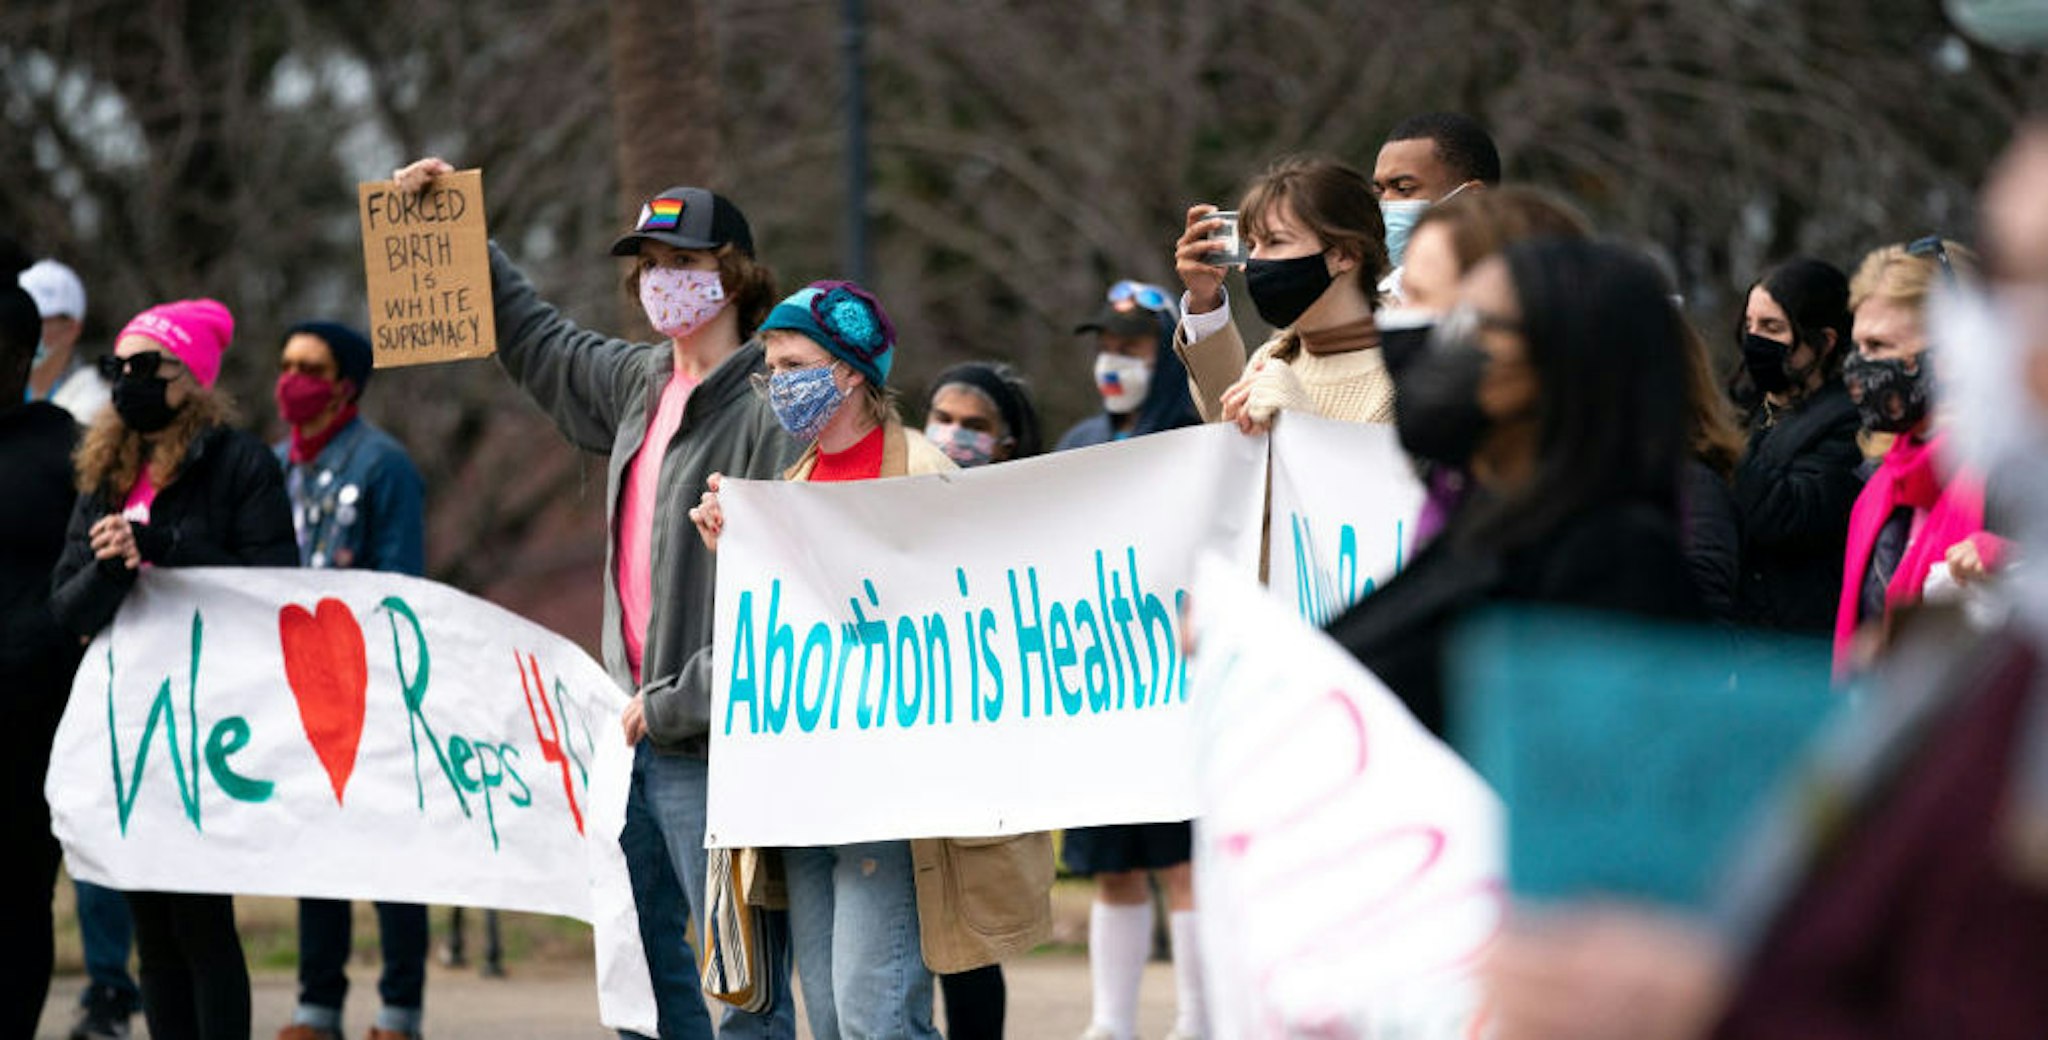 COLUMBIA, SOUTH CAROLINA, UNITED STATES - 2021/02/17: Demonstrators holding placards and banners expressing their opinion, during a press conference and protest by Democrats who walked out during a debate on an anti-abortion bill in the House of Representatives. Republicans passed the bill and after being signed by the Governor, it will most likely cause a constitutional showdown in the courts.